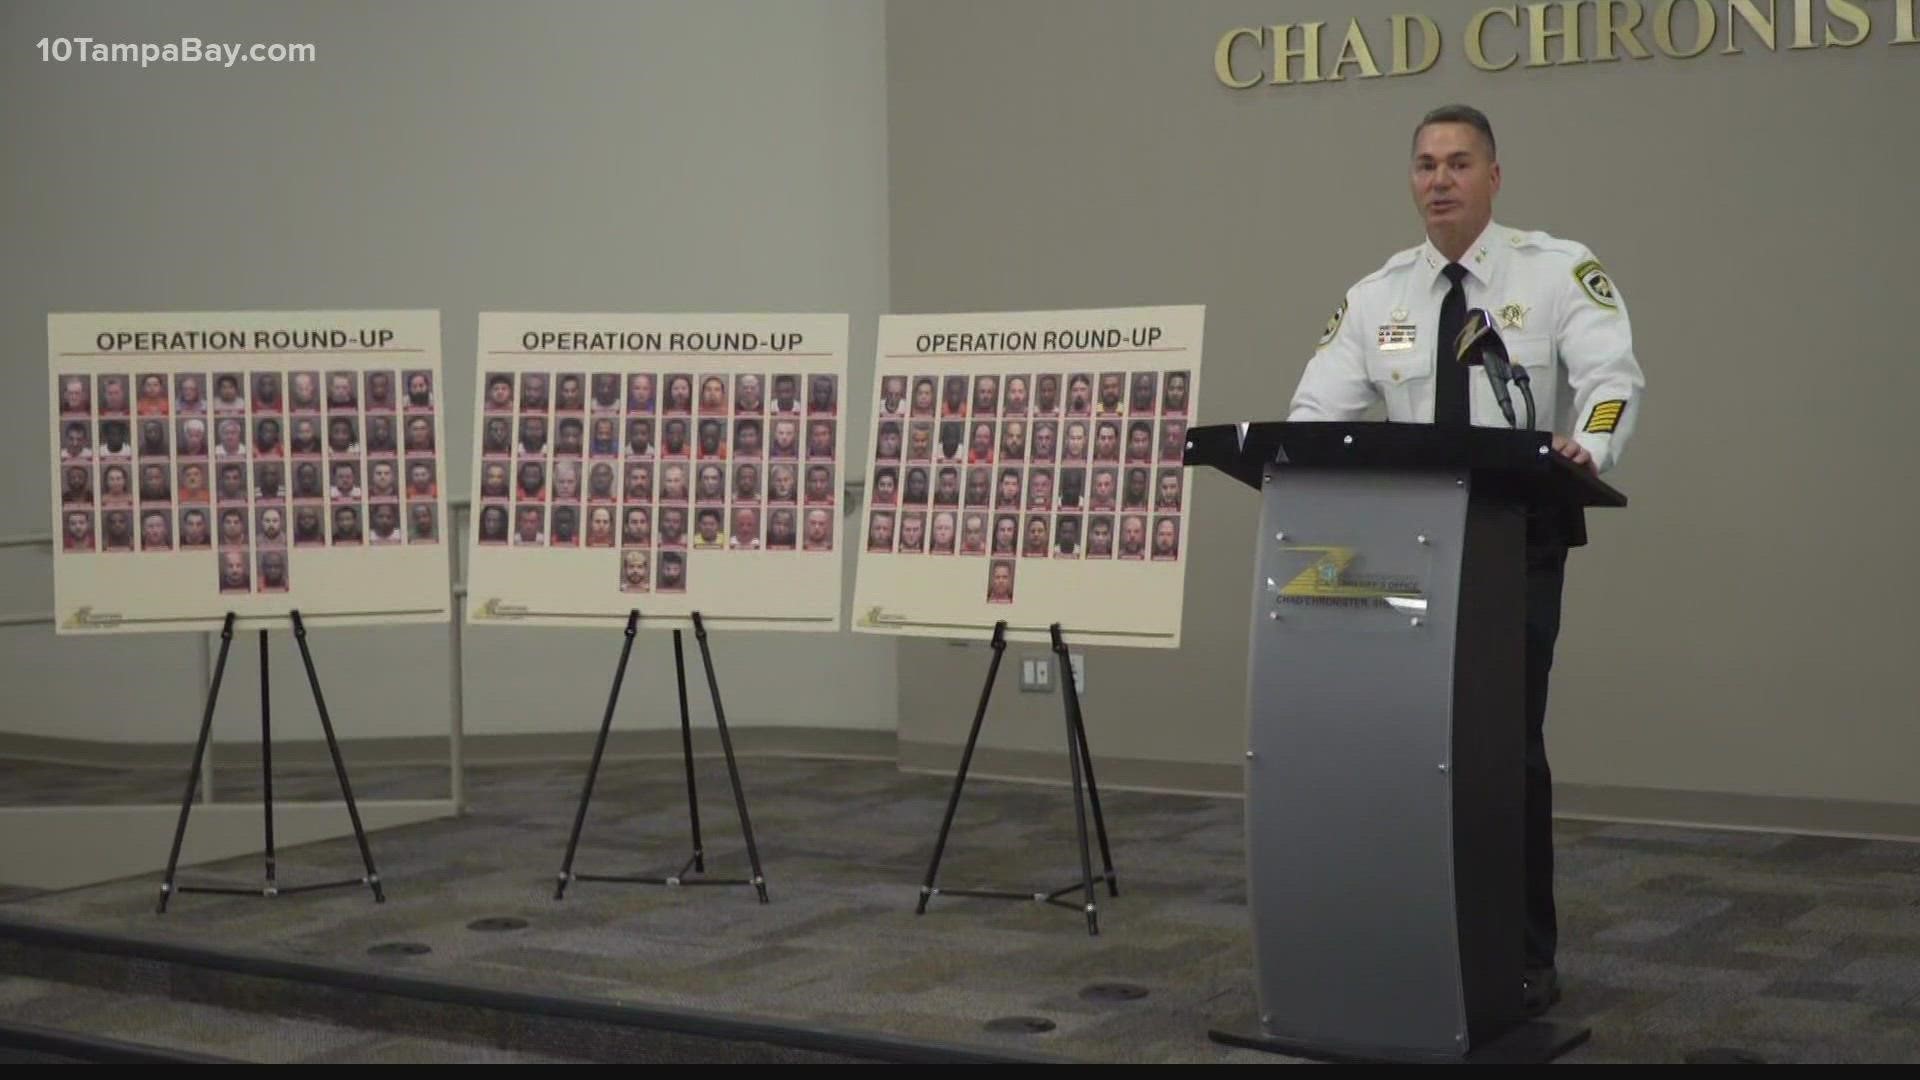 Sheriff Chad Chronister says four women and one teenager were rescued from human trafficking during the operation.